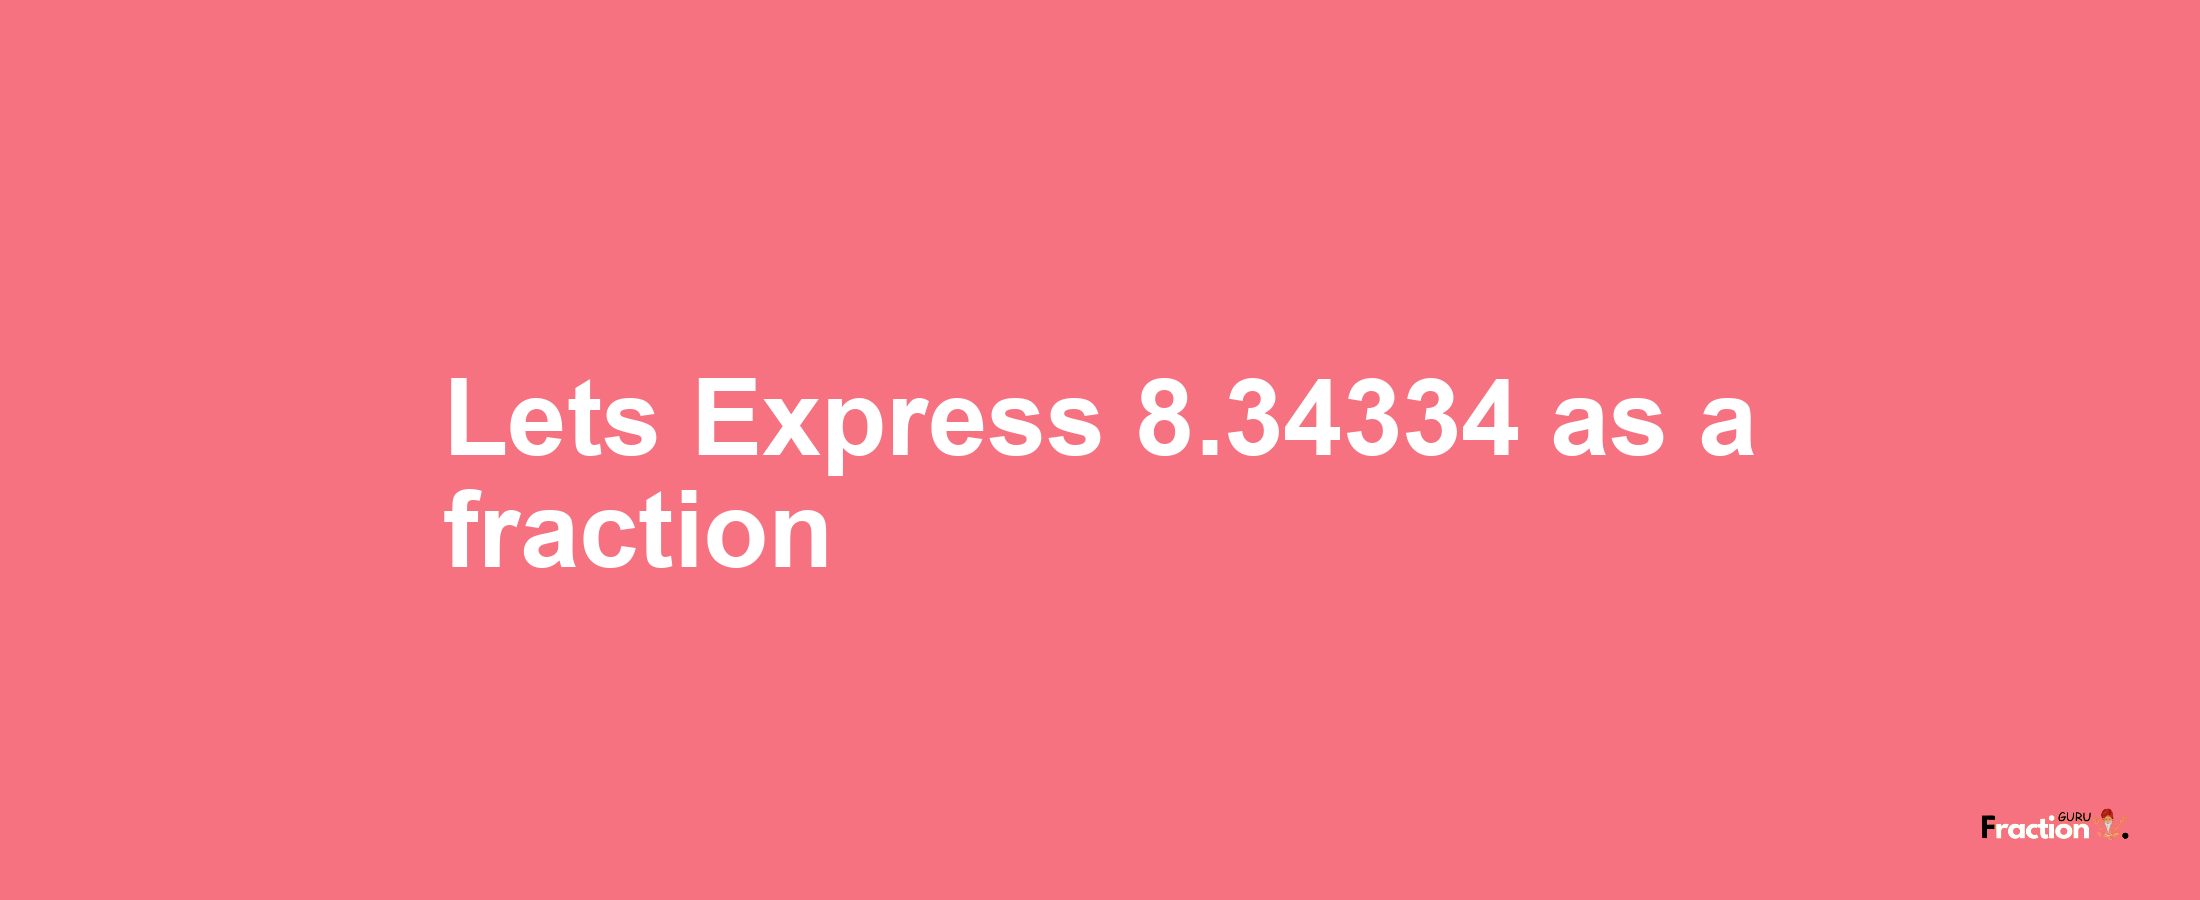 Lets Express 8.34334 as afraction